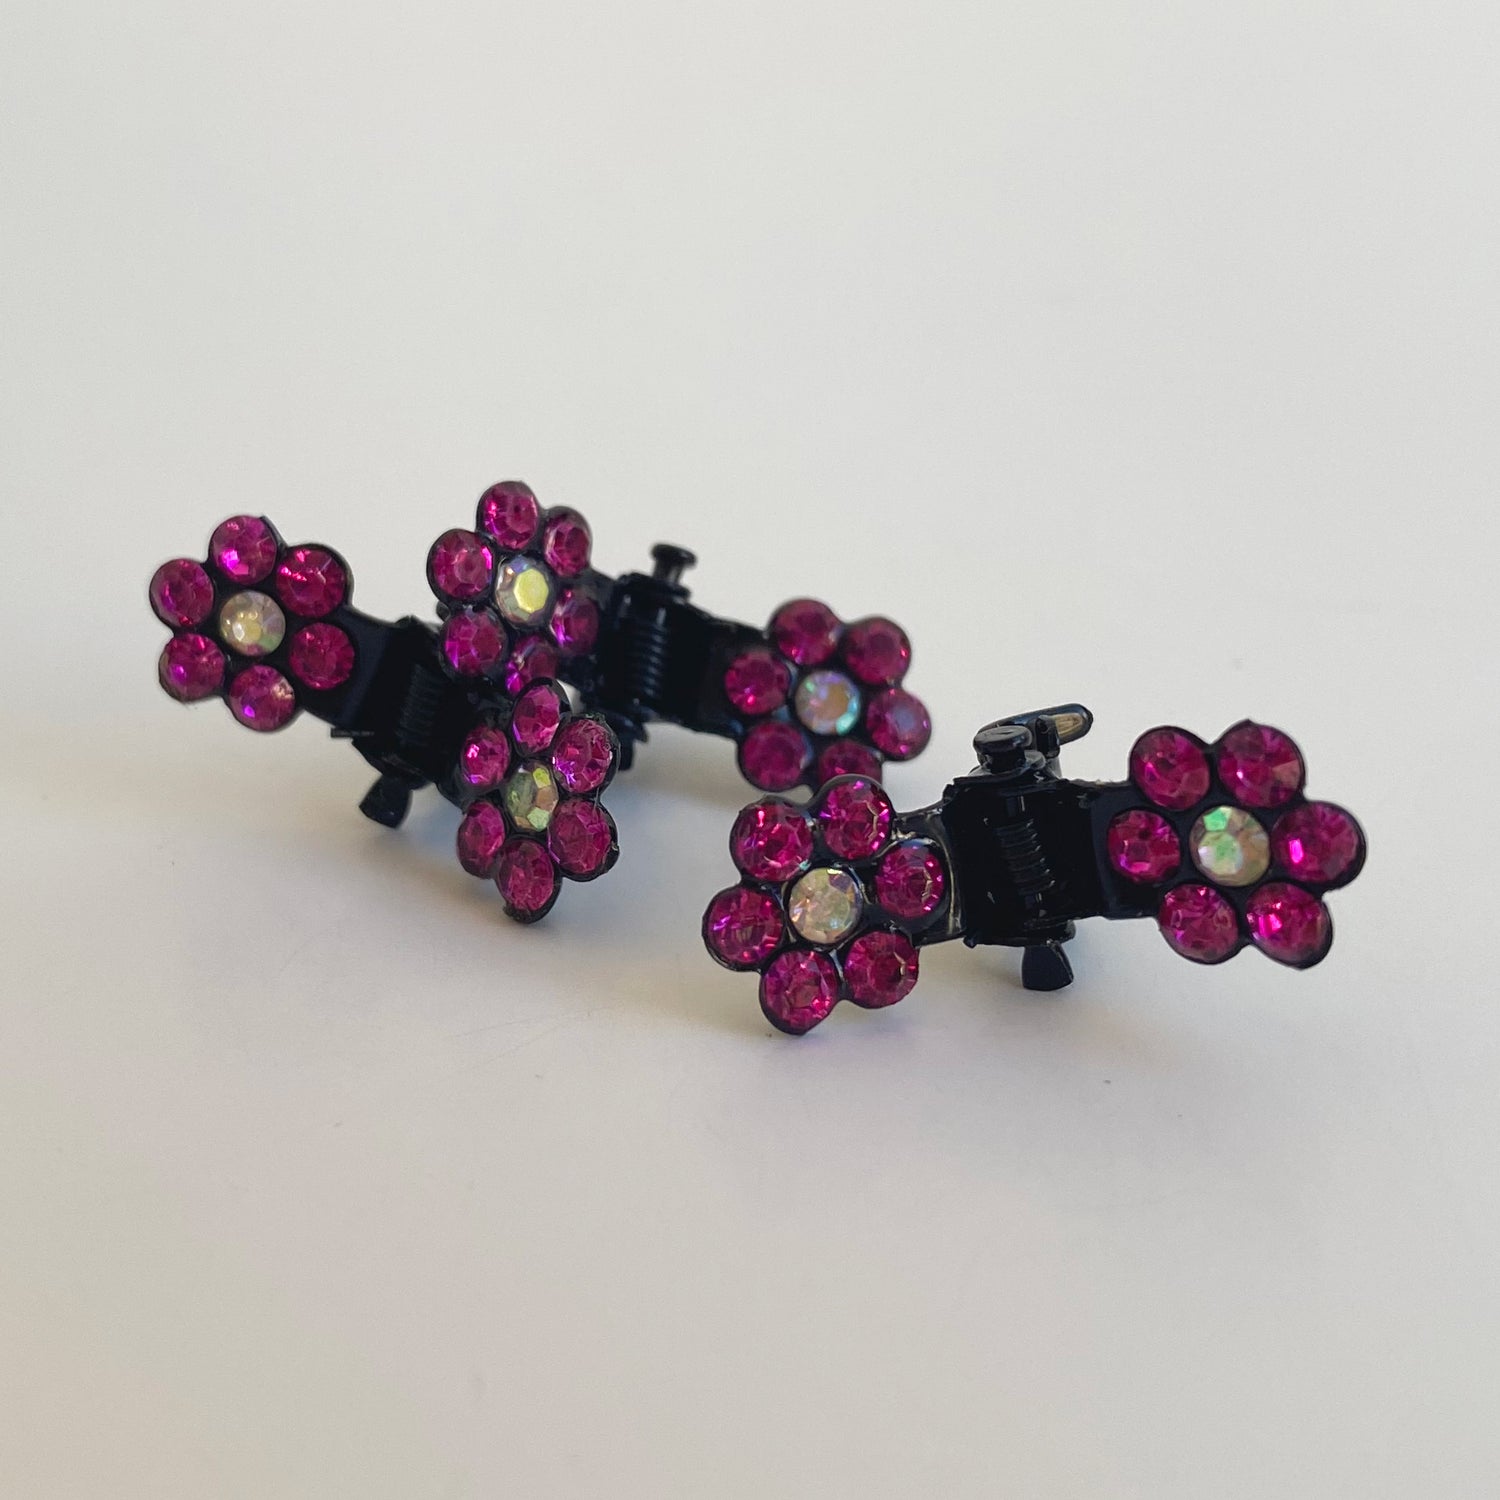 Small Rhinestone Flower Hair Clips in hot pink